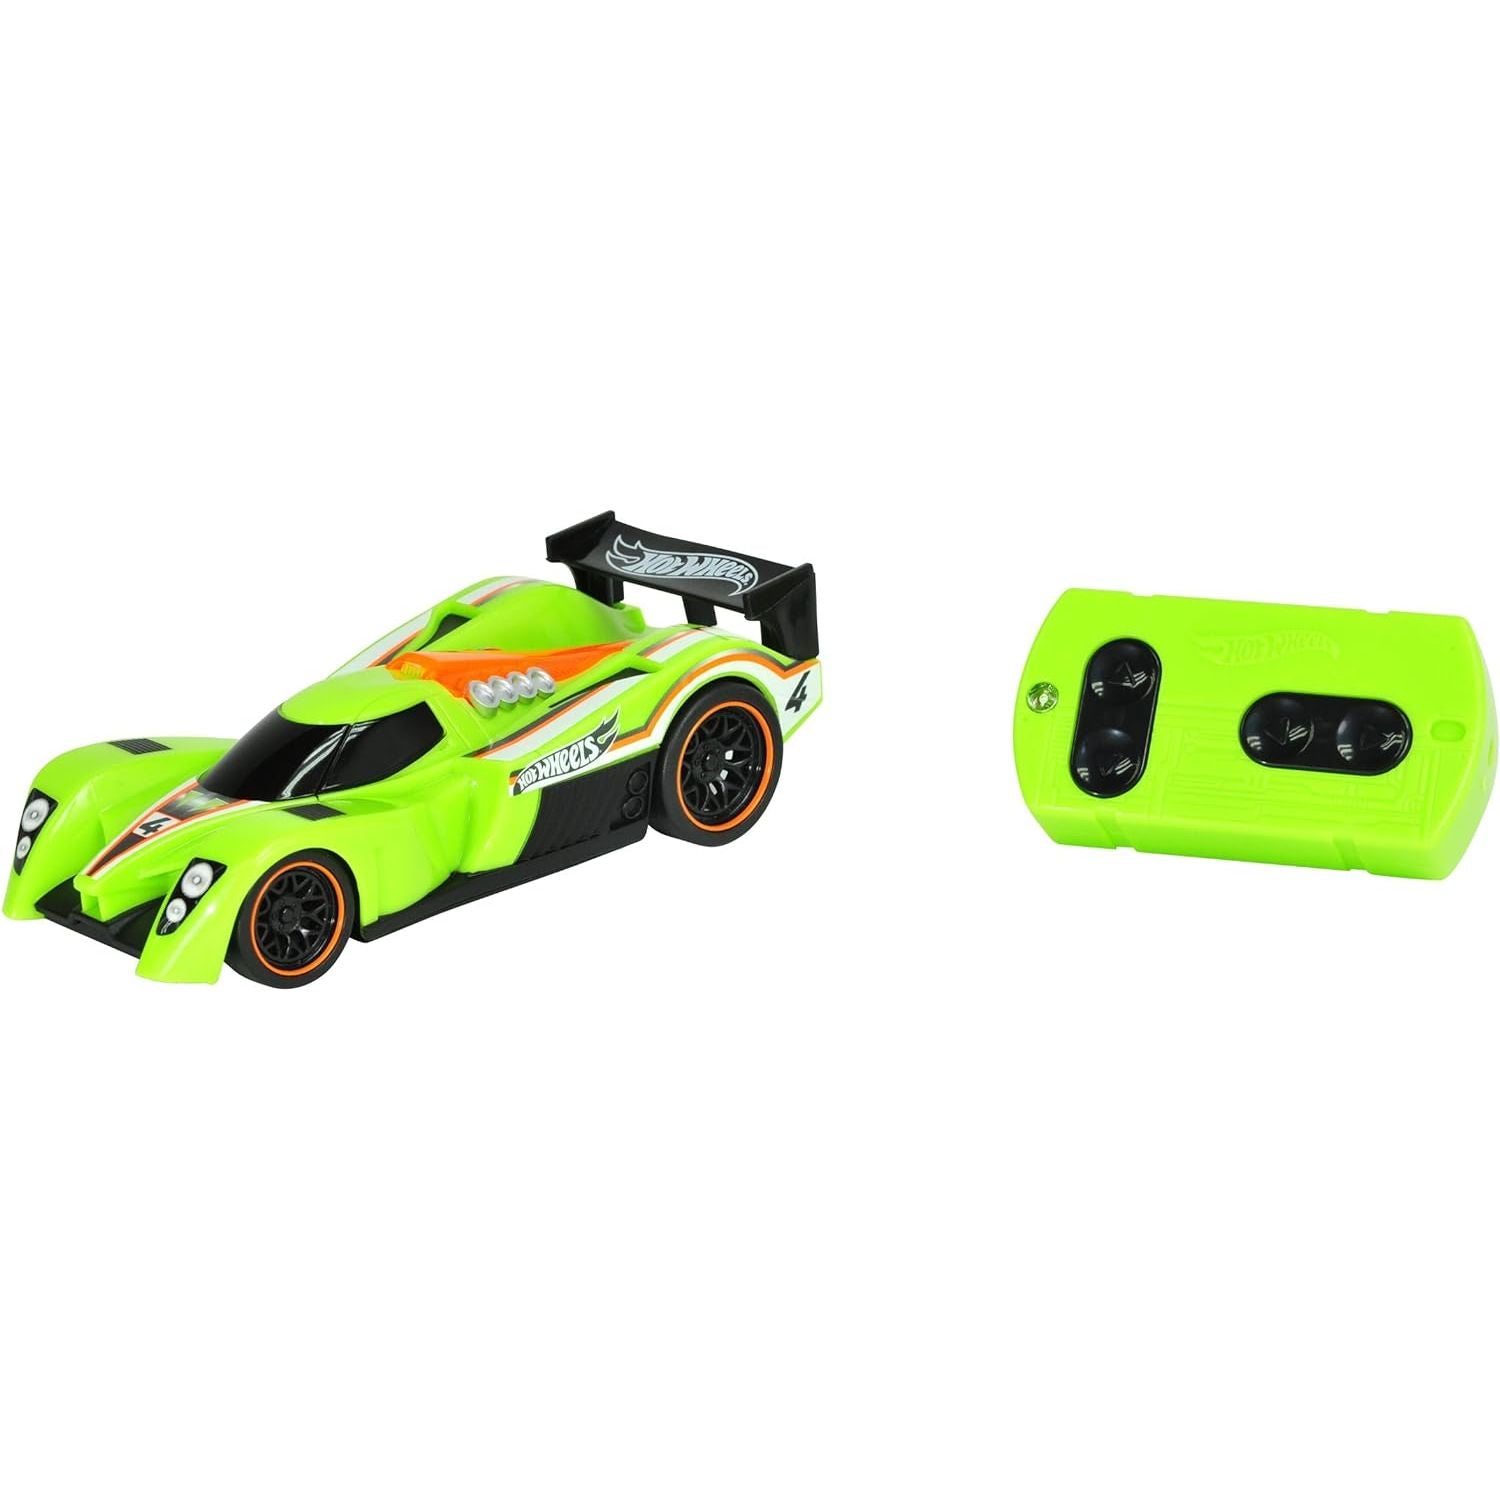 Hot Wheels Remote Control Toy Car 24 Hours Product Image